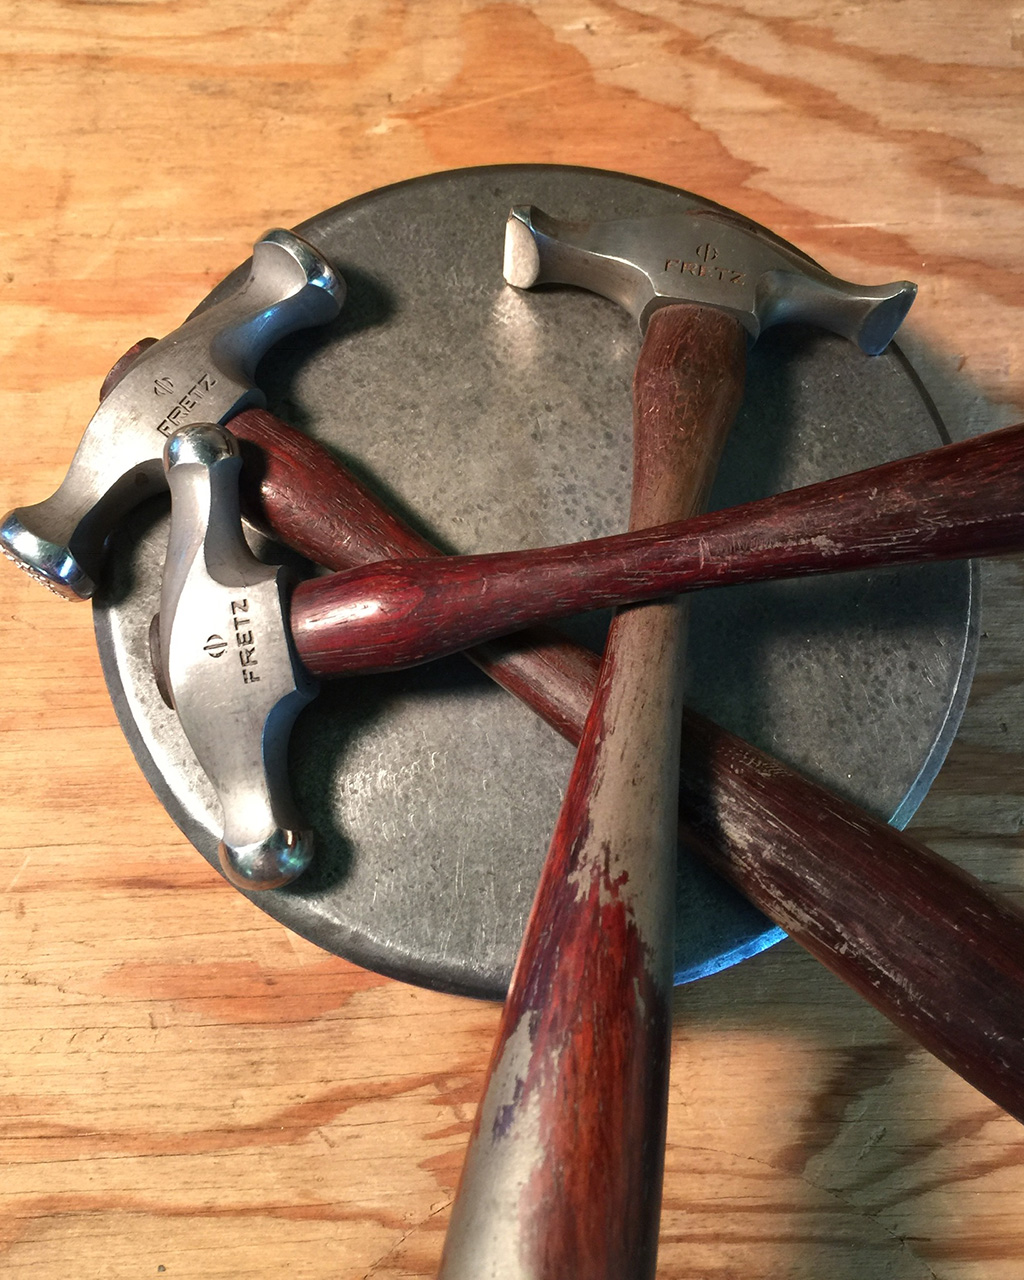 Elisa Saucy's jewelry tools more hammers